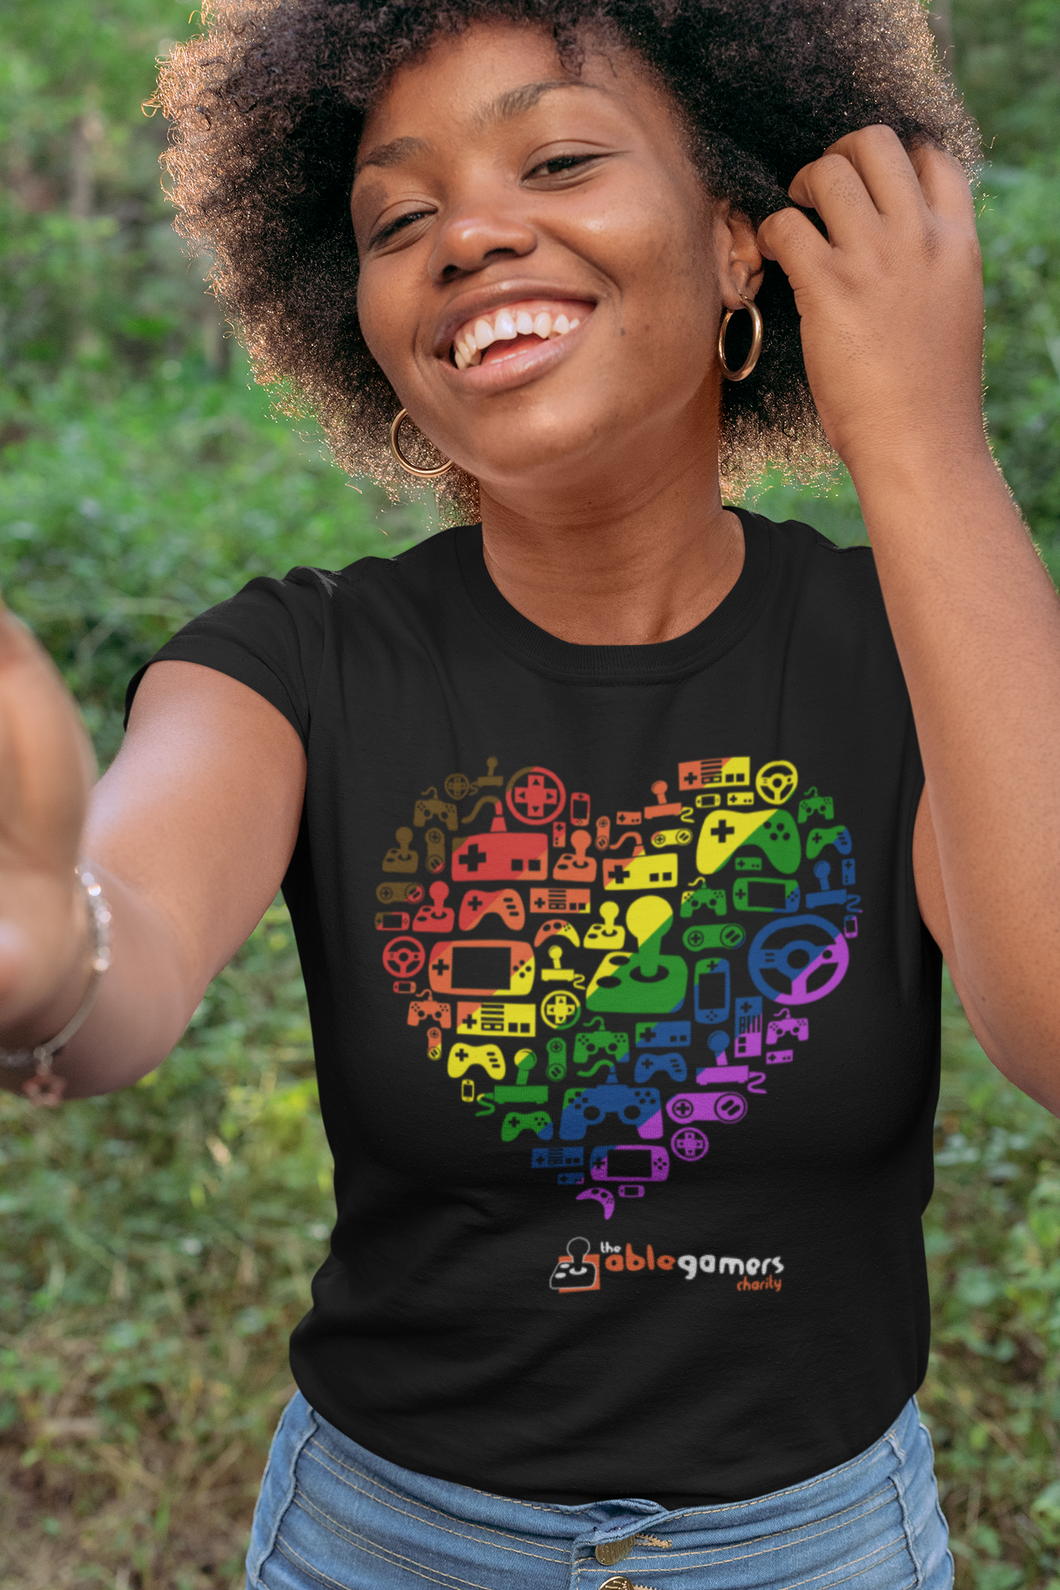 An African-American women wearing a black t-shirt. On the shirt is a heart made up of the AbleGamers logo, and came controller icons. The heart is colored in a rainbow, starting with Brown in the upper left to purple in the lower right. AbleGamers is at the bottom, and 